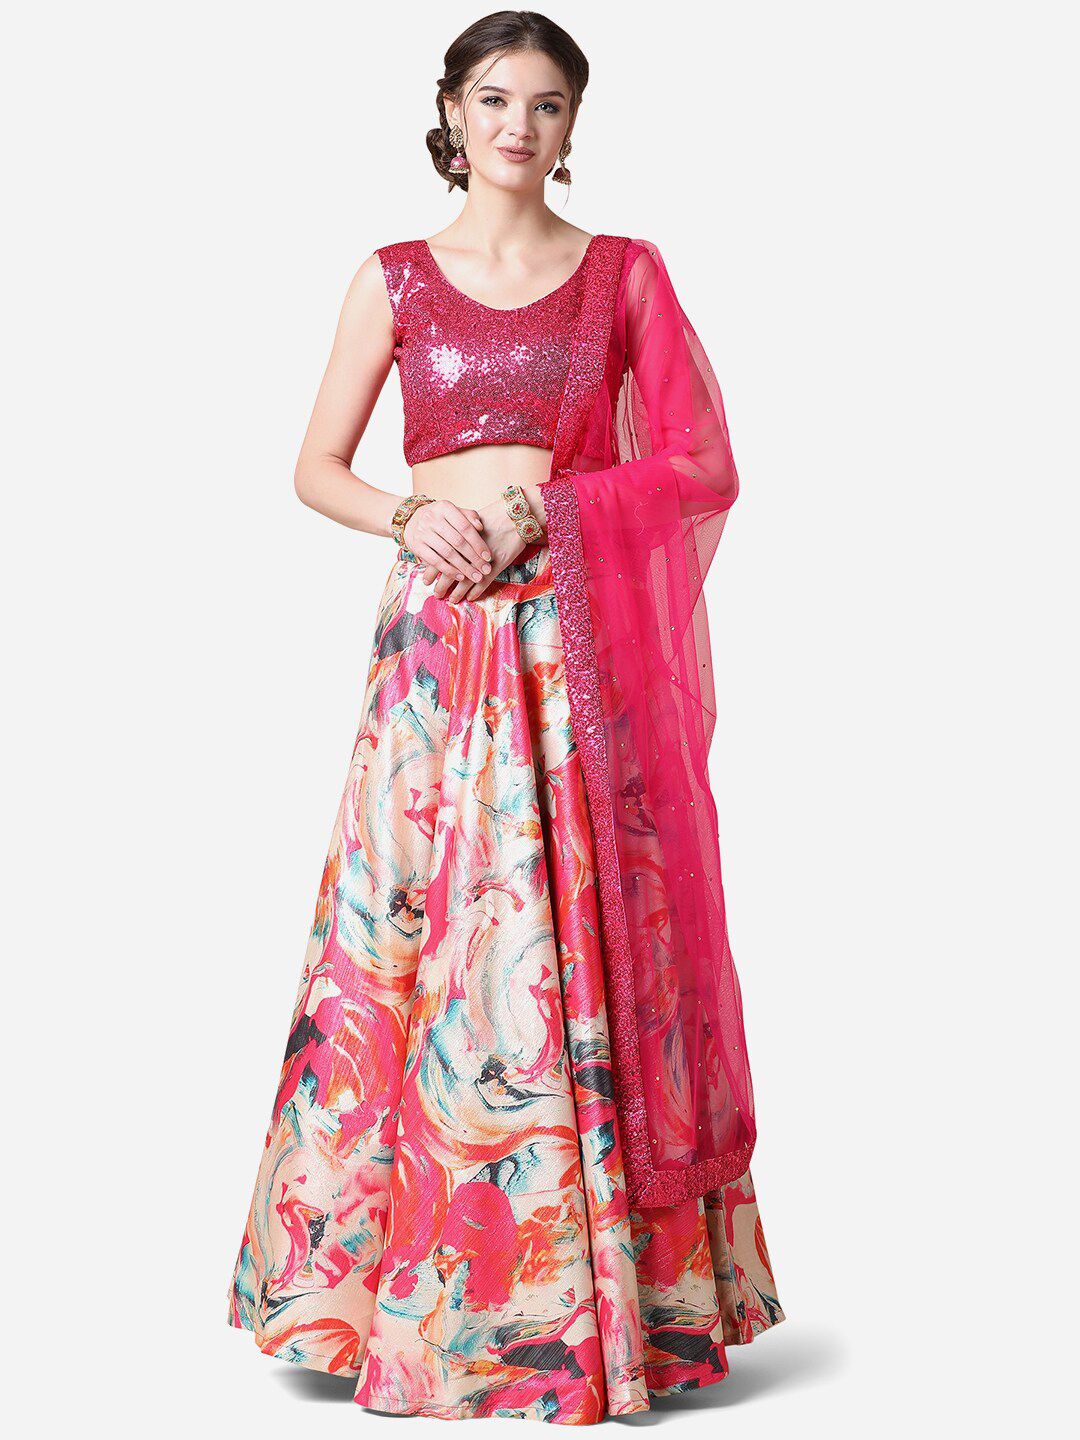 Cloth's Villa Pink Embellished Semi-Stitched Lehenga & Unstitched Blouse With Dupatta Price in India